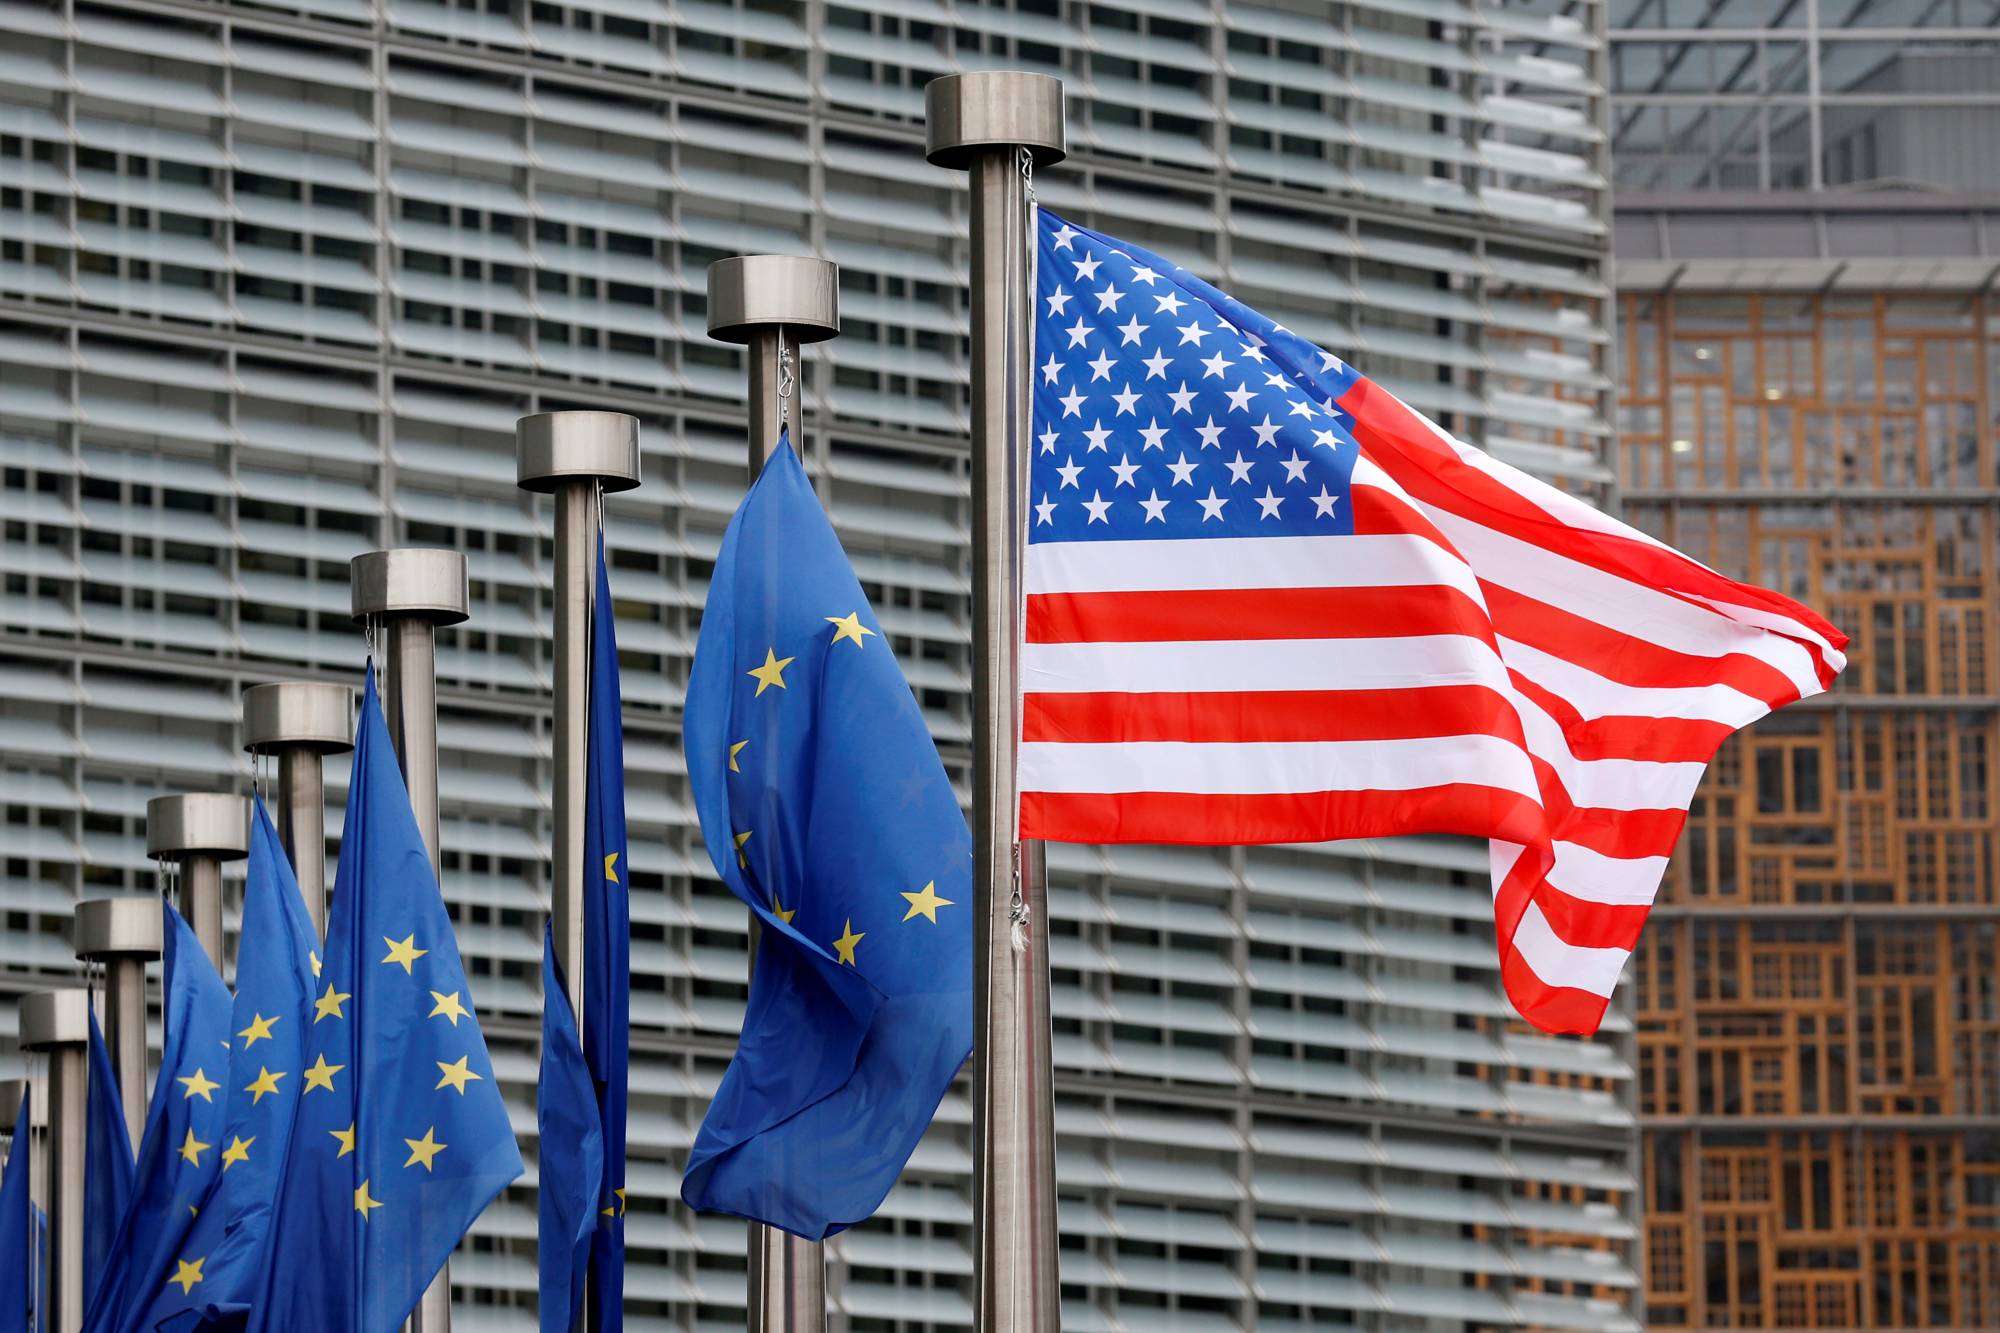 The U.S. flag is flown outside the European Commission headquarters in Brussels. New EU regulations designed to curtail the power of Big Tech, will have a far-reaching impact on the business practices of Apple, Amazon, Facebook, Google and other primarily U.S.-based giants. | REUTERS